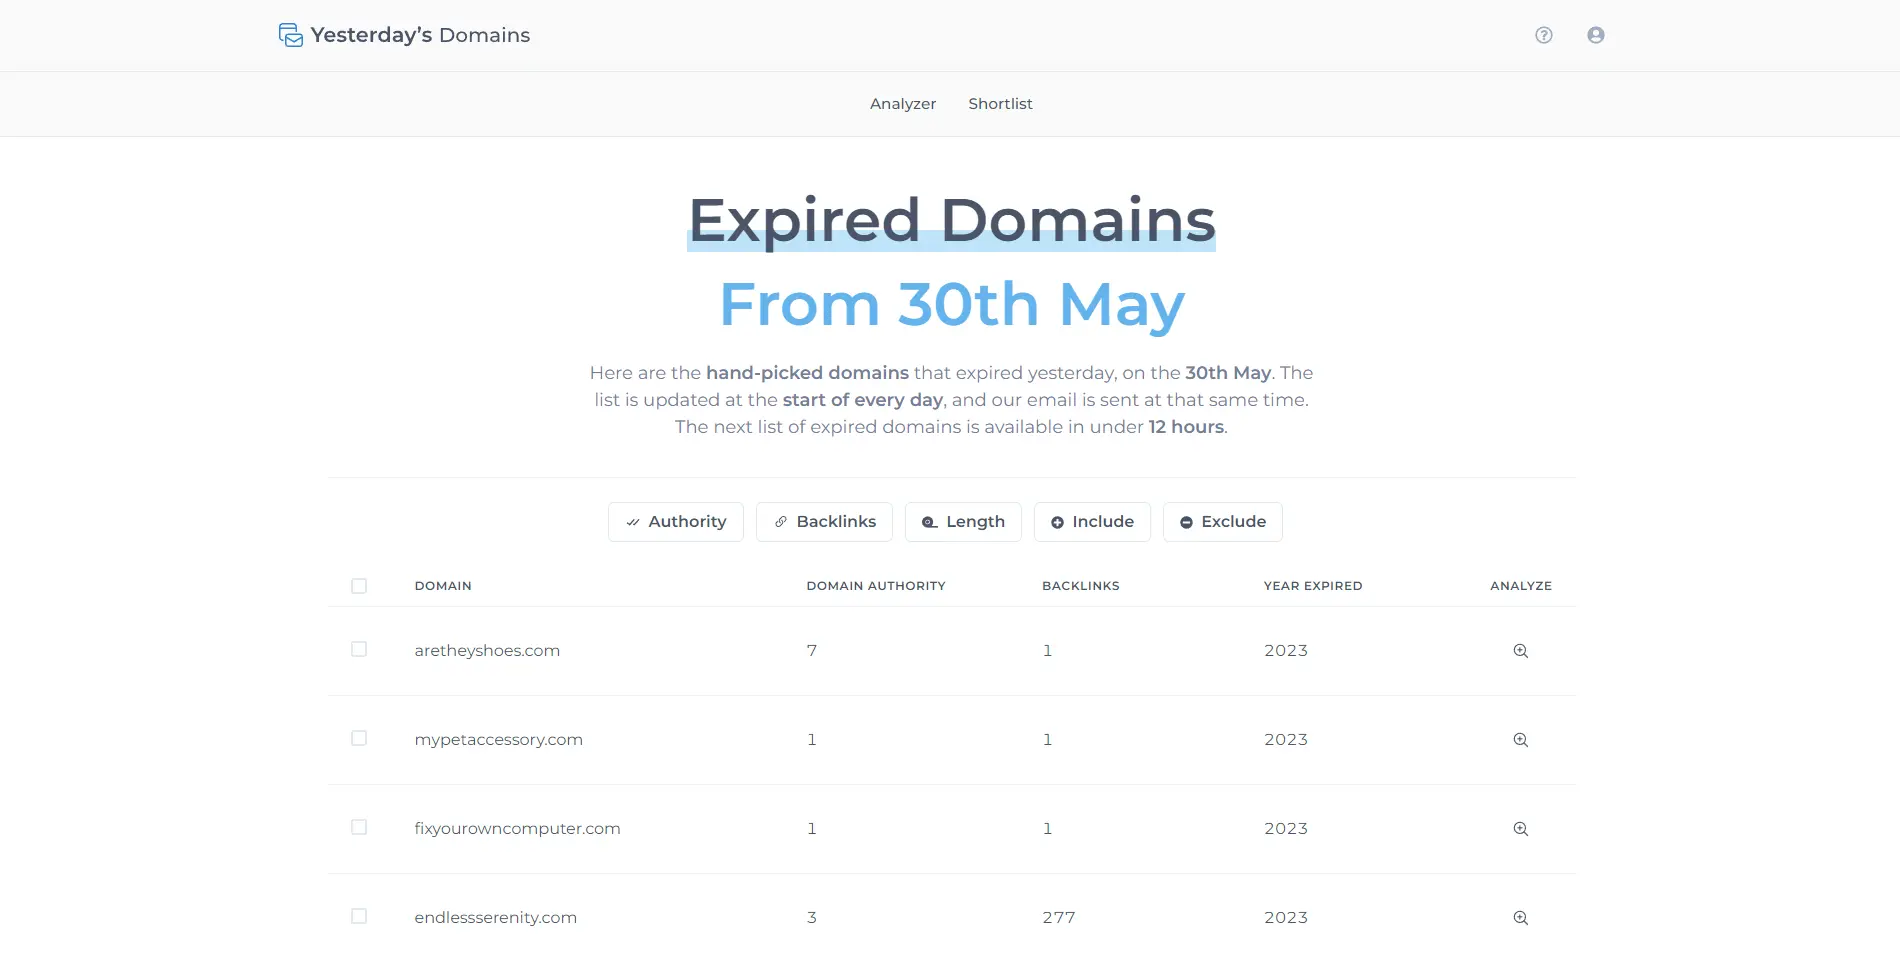 Finding the Expired Domains